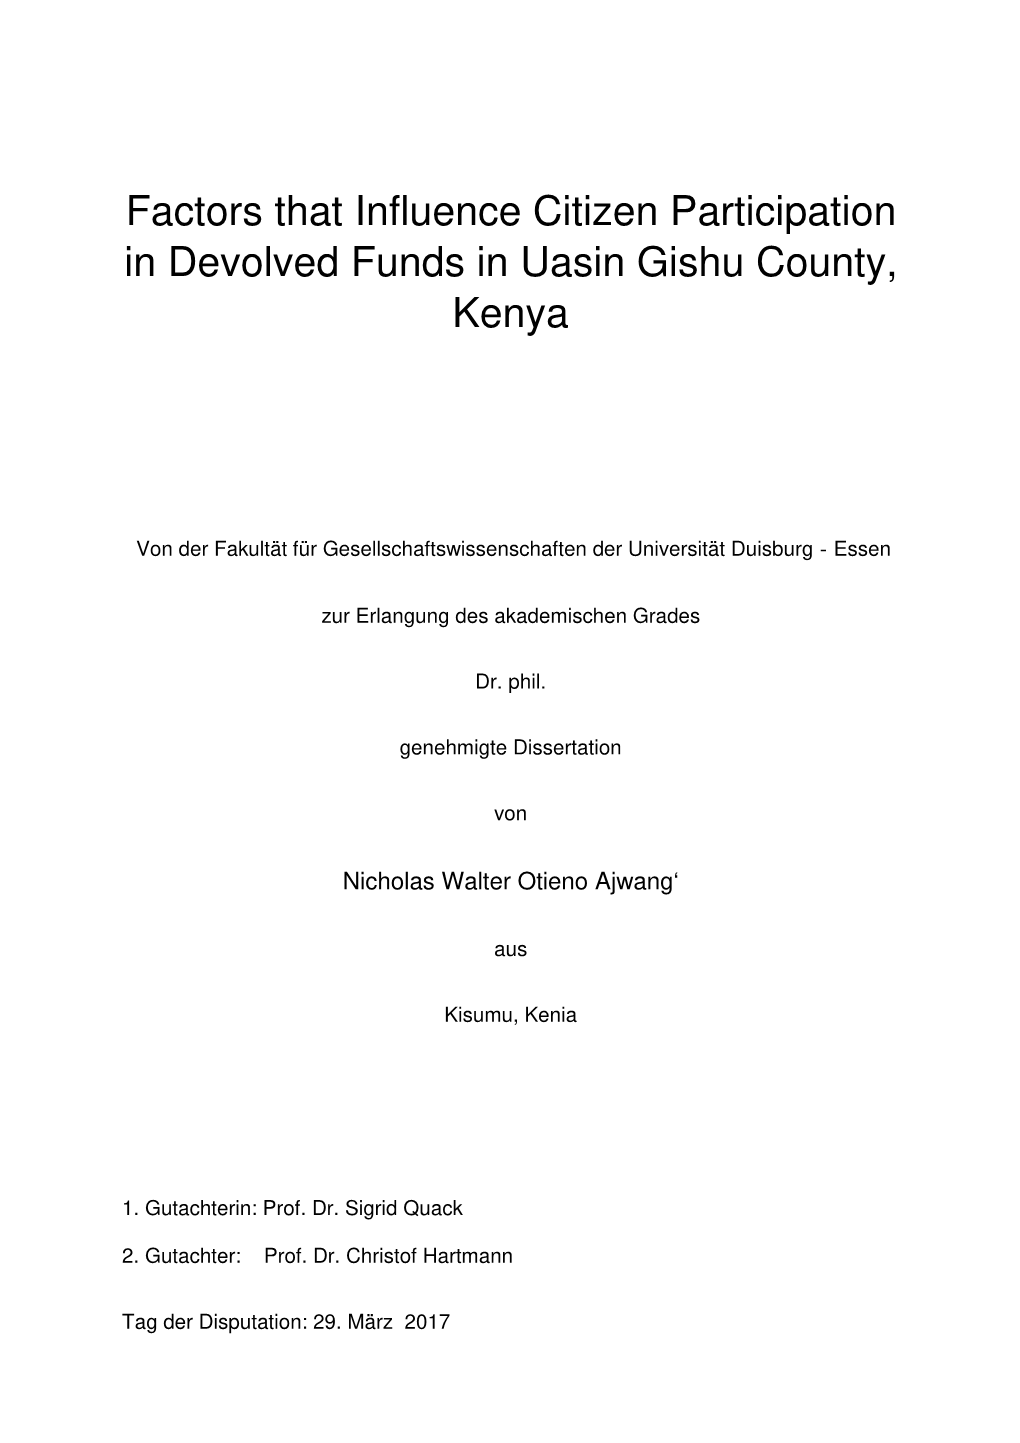 Factors That Influence Citizen Participation in Devolved Funds in Uasin Gishu County, Kenya